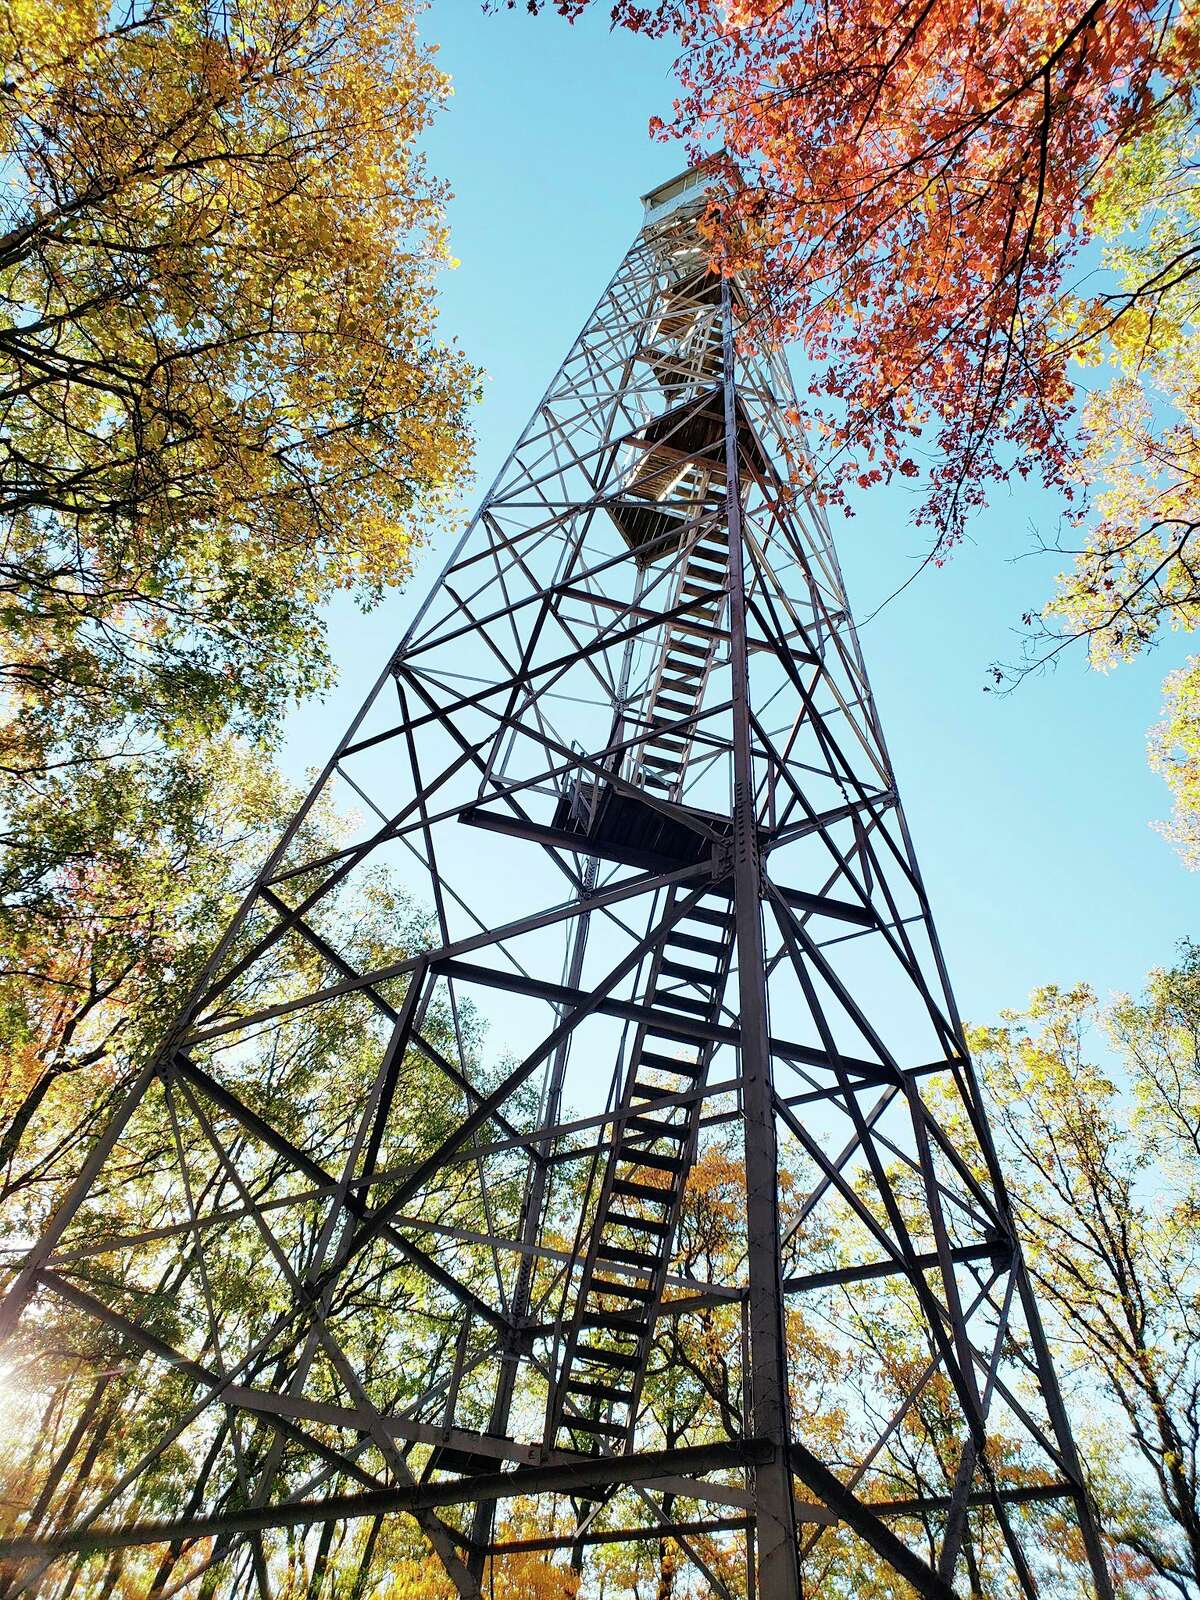 The U.S. Forest Service now has a proposed list of deferred maintenance projects for the 2022 fiscal year up for public input through Nov. 30. Relocation of the Udell Fire Tower on Fire Tower Road near Wellston in the is on the list. (File photo)